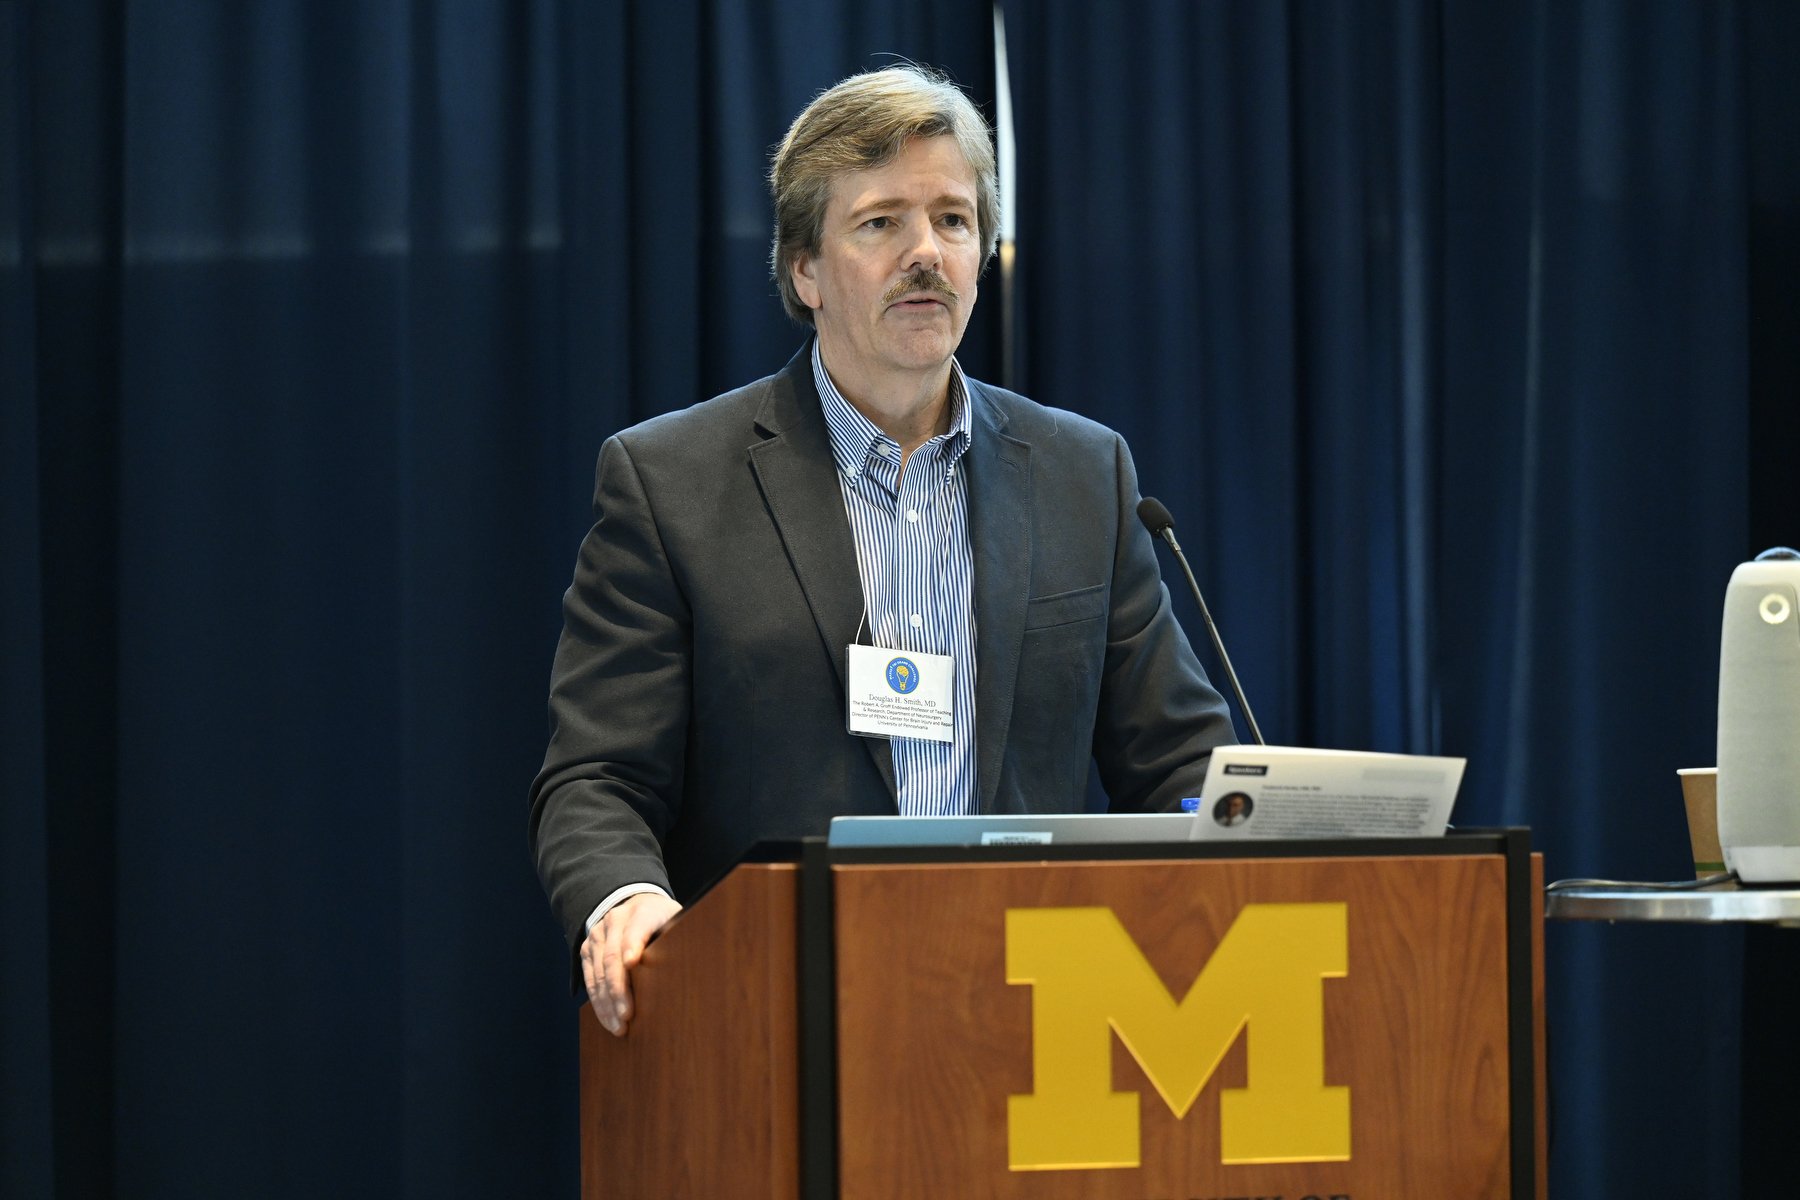  Douglas Smith, MD, University of Pennsylvania Robert A. Groff Endowed Professor of Teaching and Research in Neurosurgery, gave this year’s keynote presentation. 